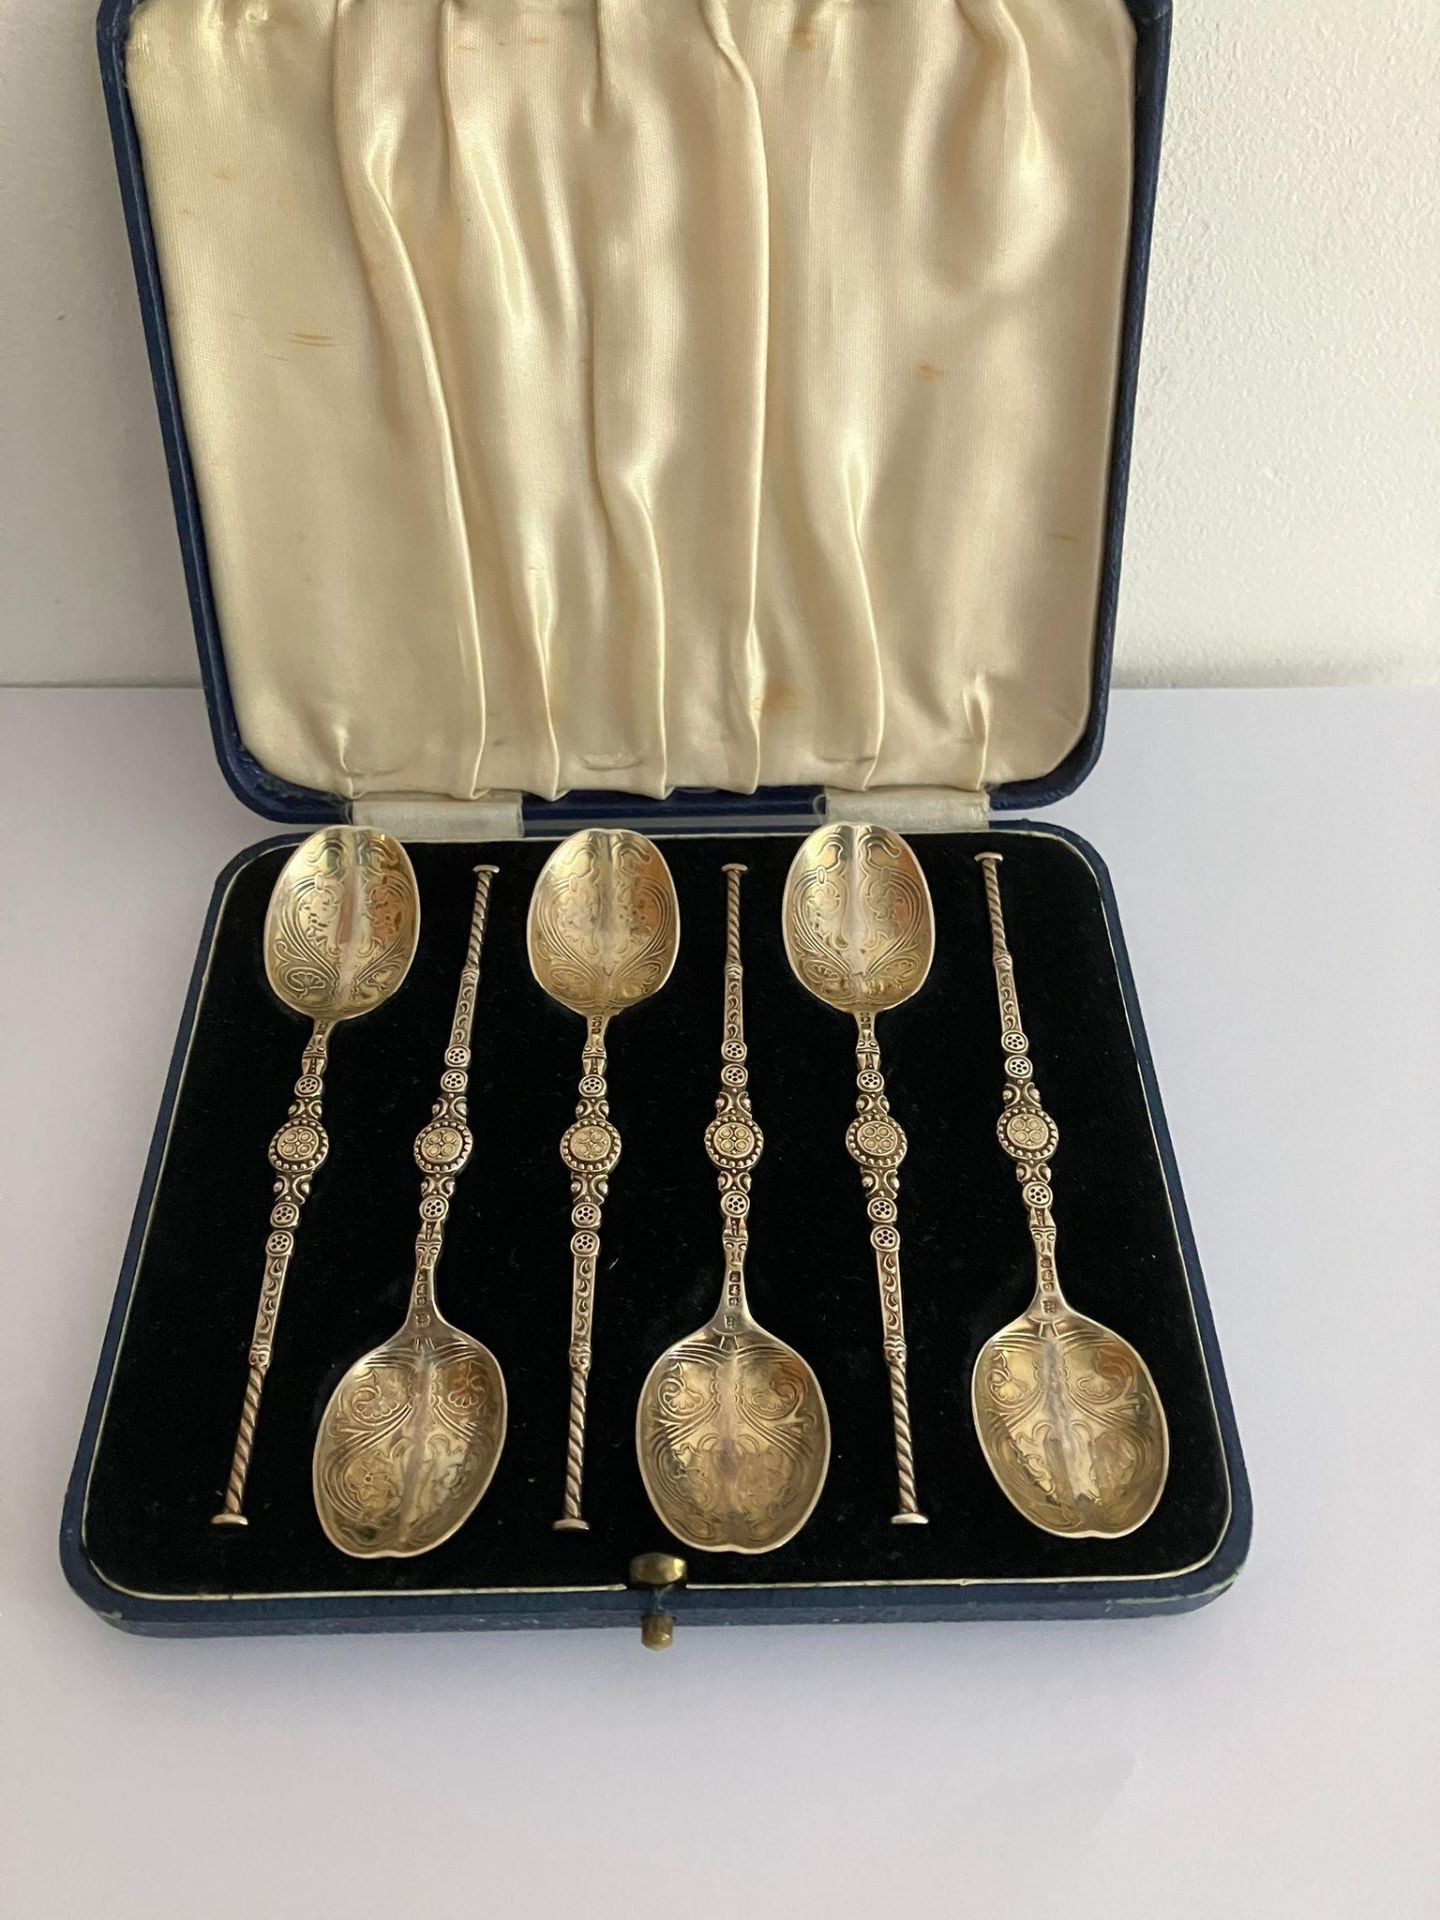 Rare Antique set of six gilded SILVER ANOINTING TEASPOONS. Clear hallmark for Charles S Green,